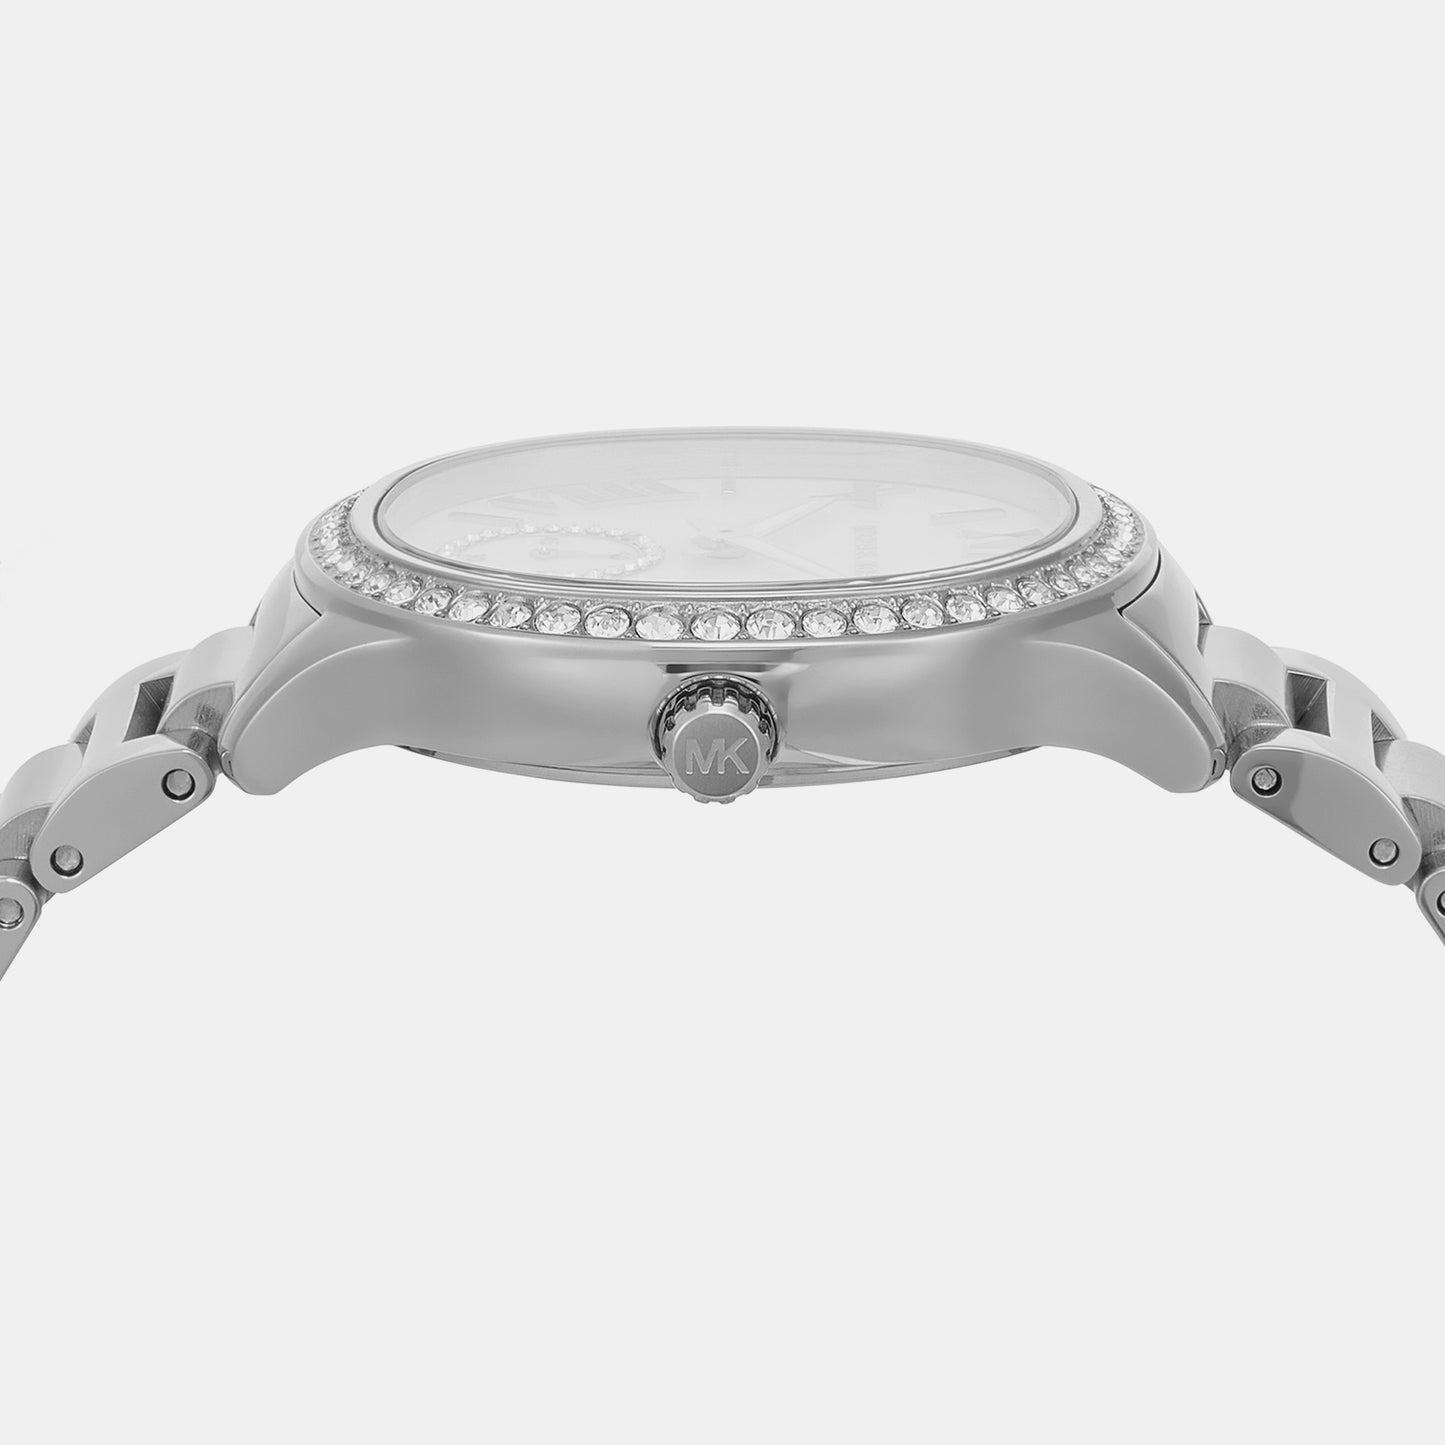 Female Silver Analog Stainless Steel Watch MK4807